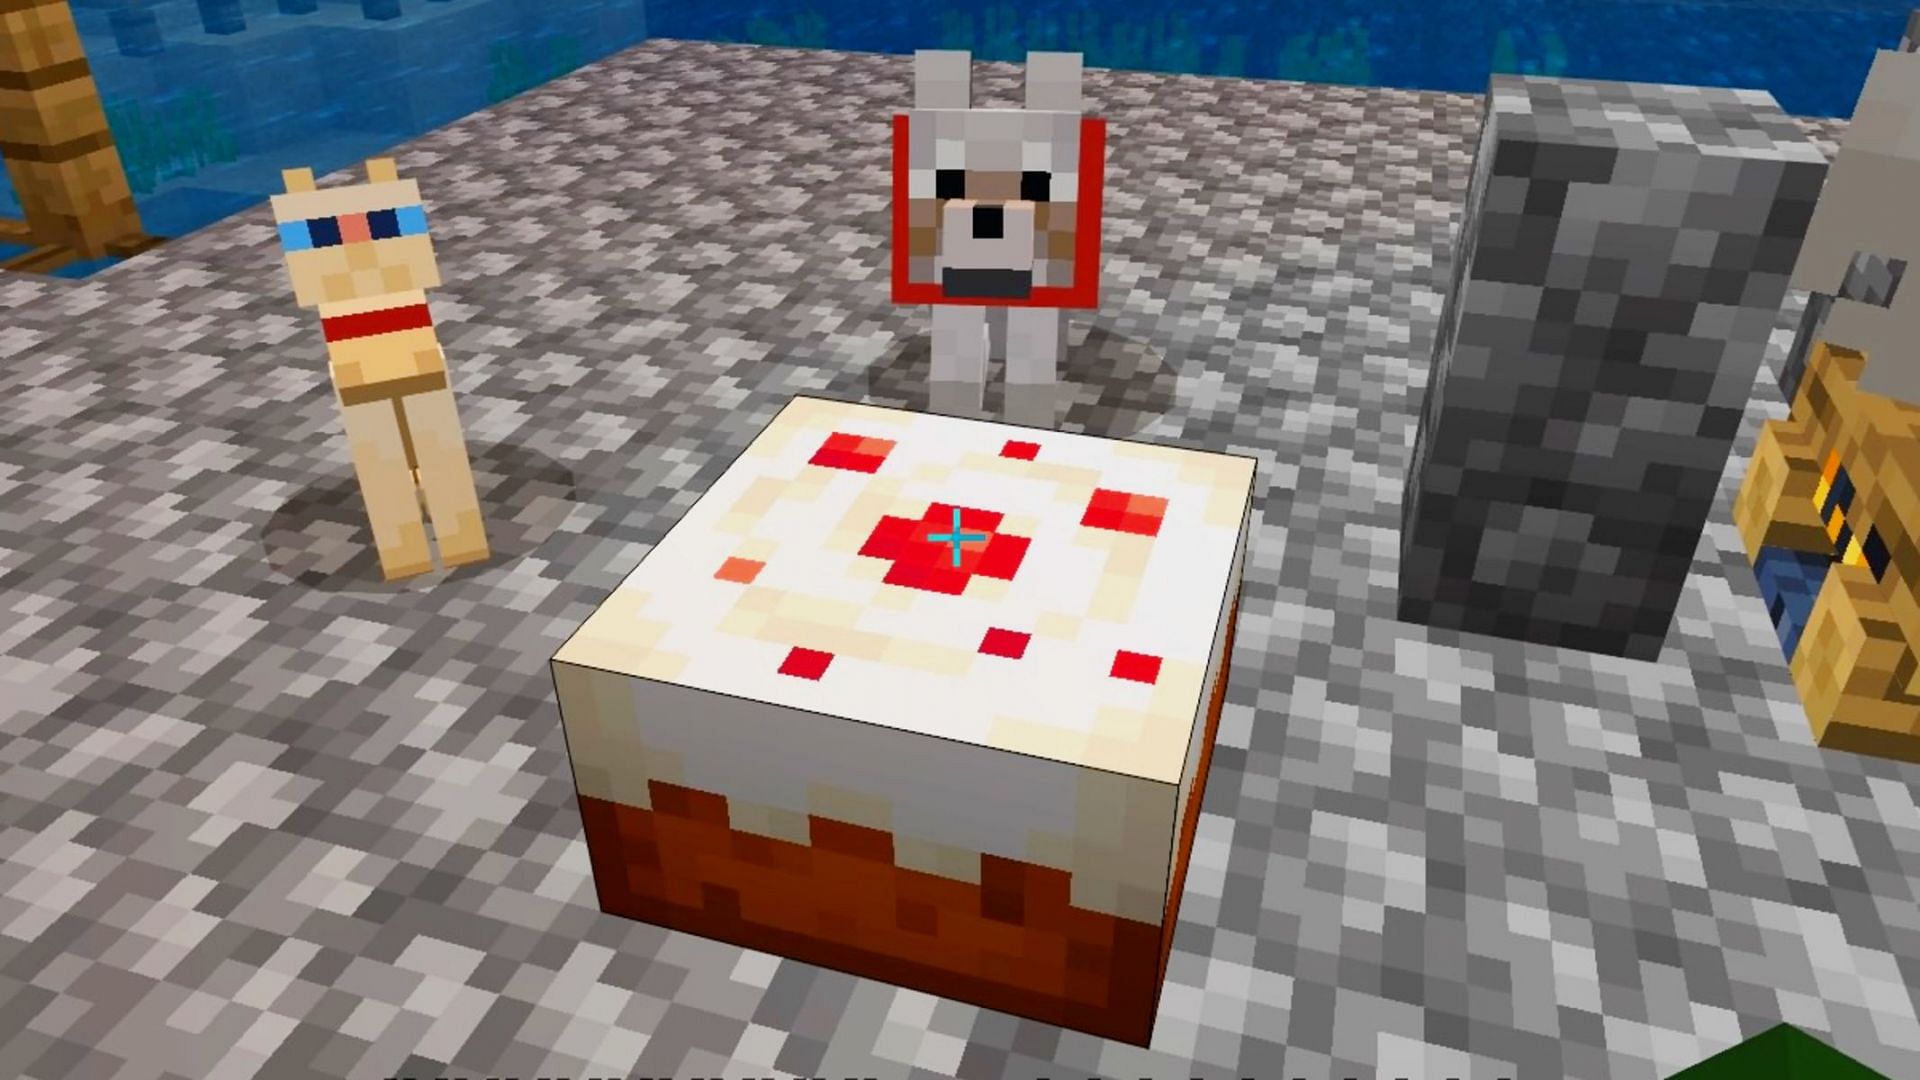 A cat and tamed wolf keeping an eye on a player&#039;s Cake (Image via Vgkami)